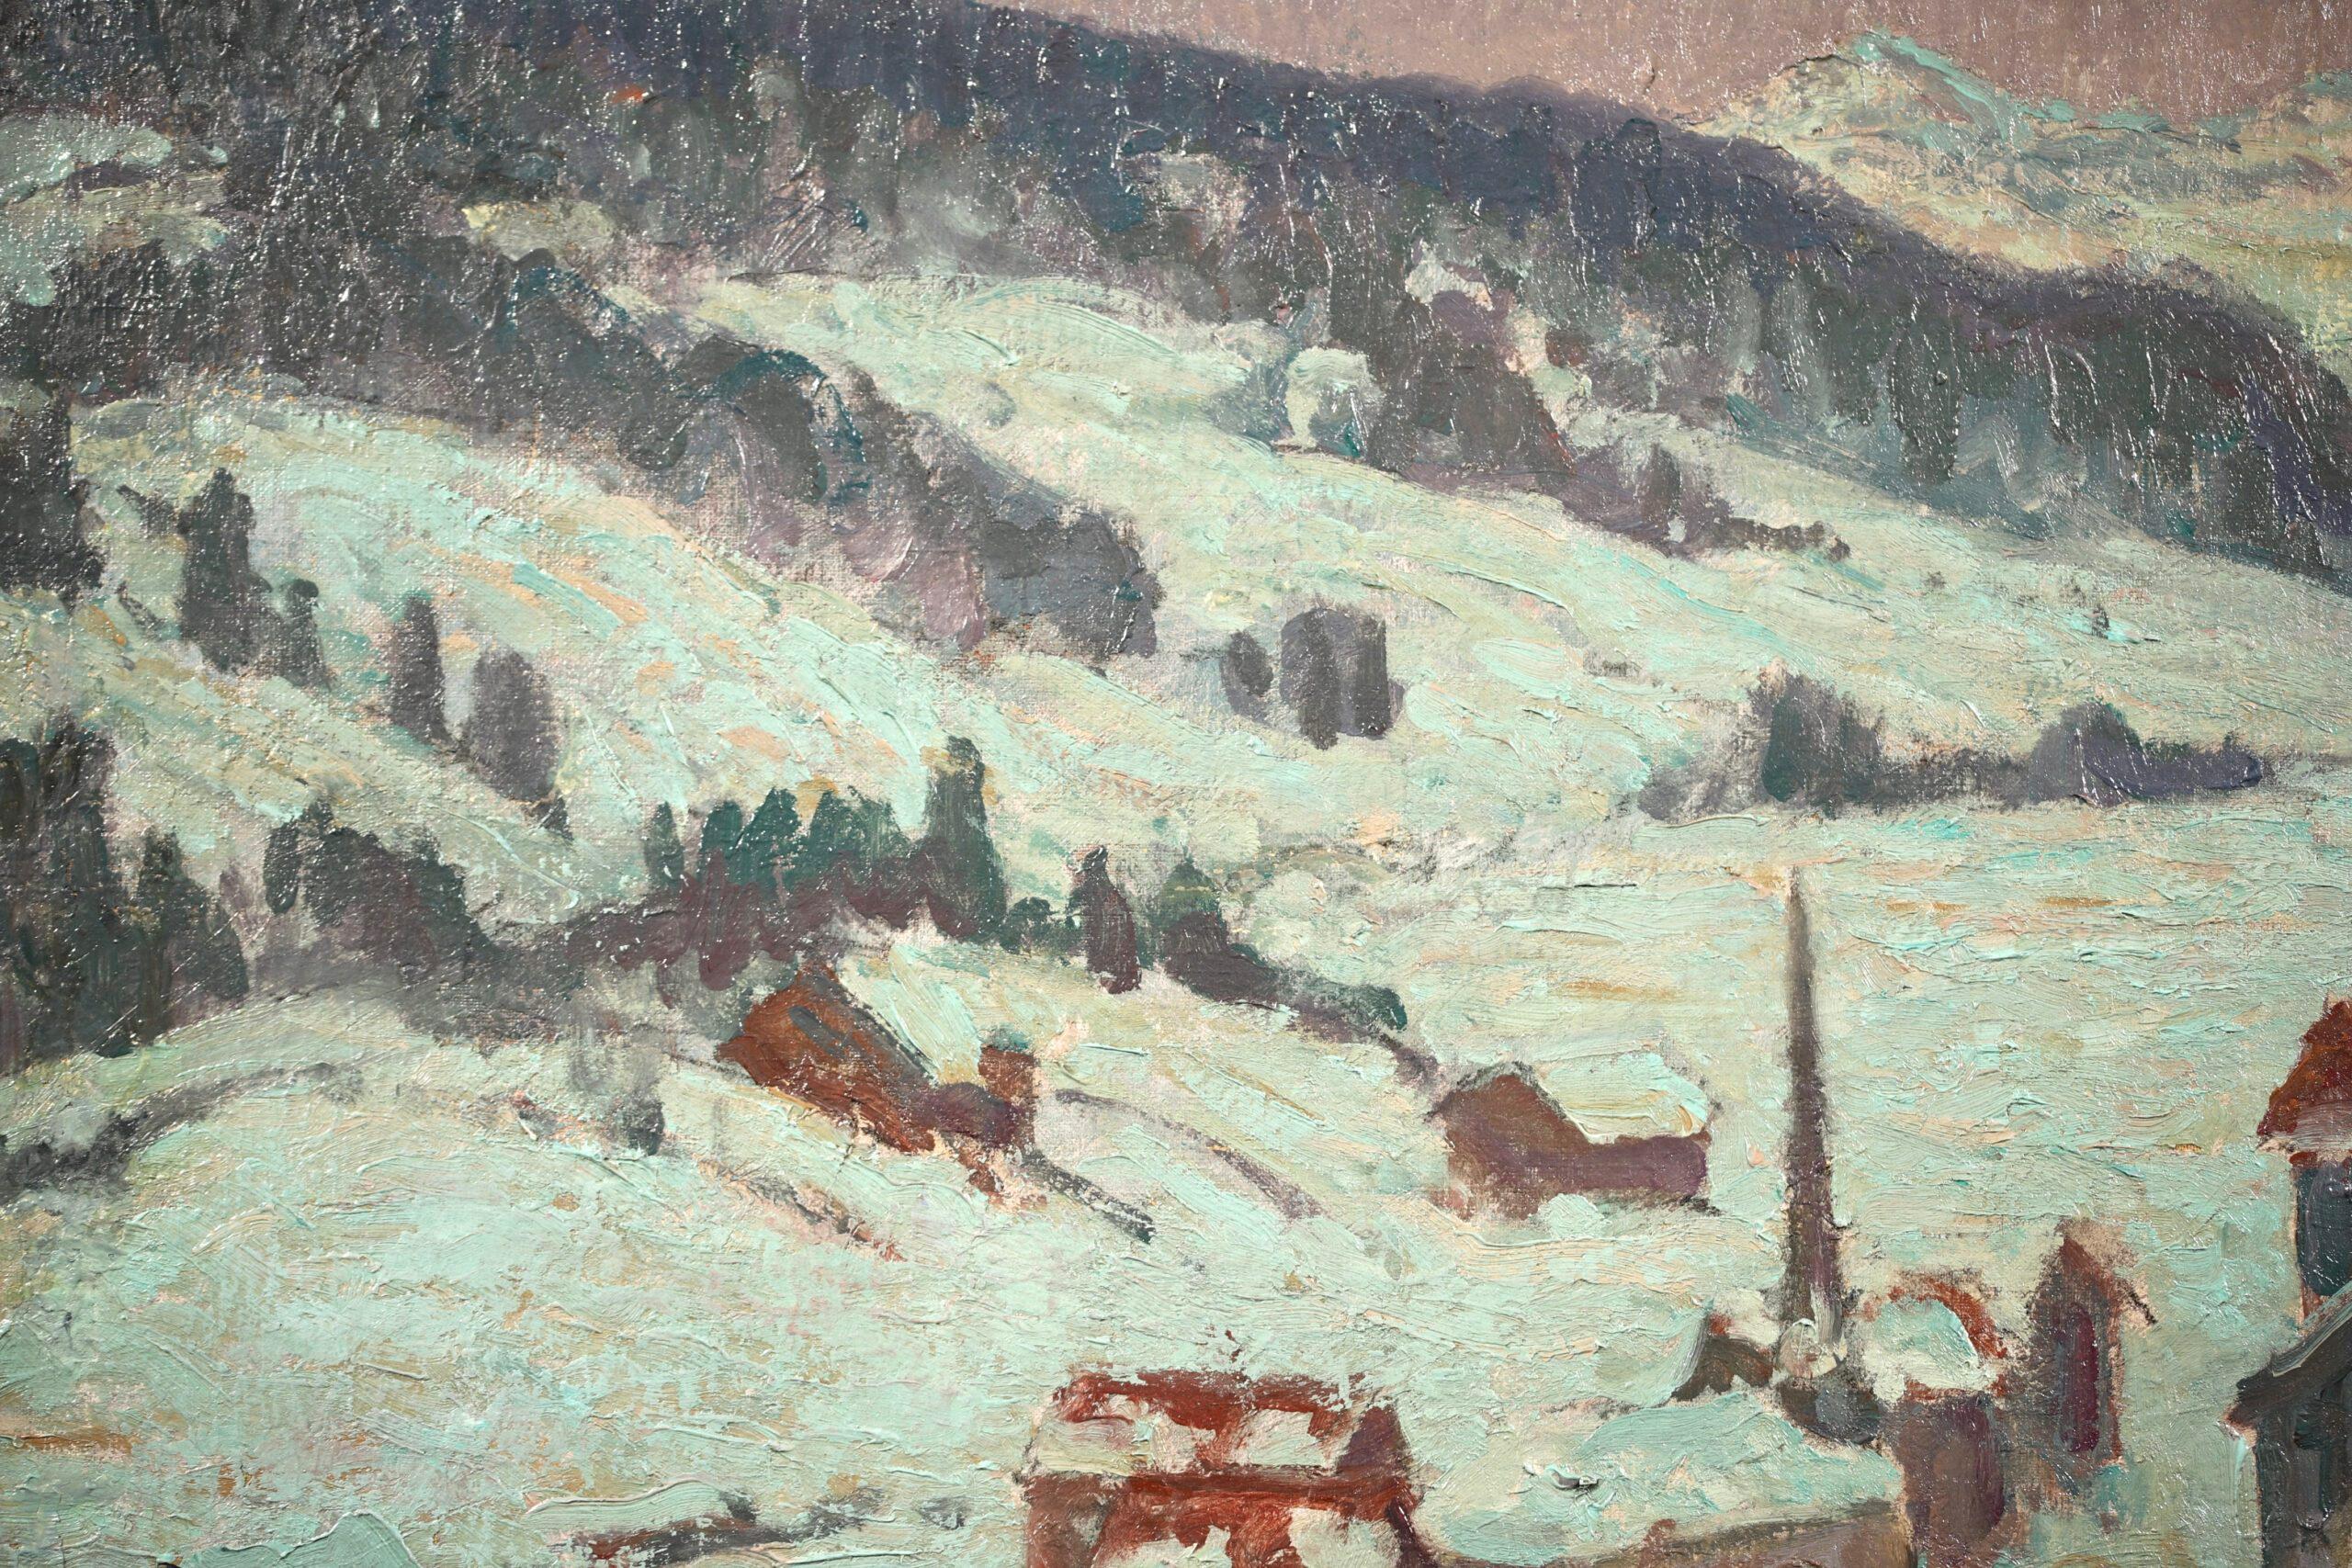 Winter Snow - Gstaad - Impressionist Landscape Oil by William Samuel Horton For Sale 2